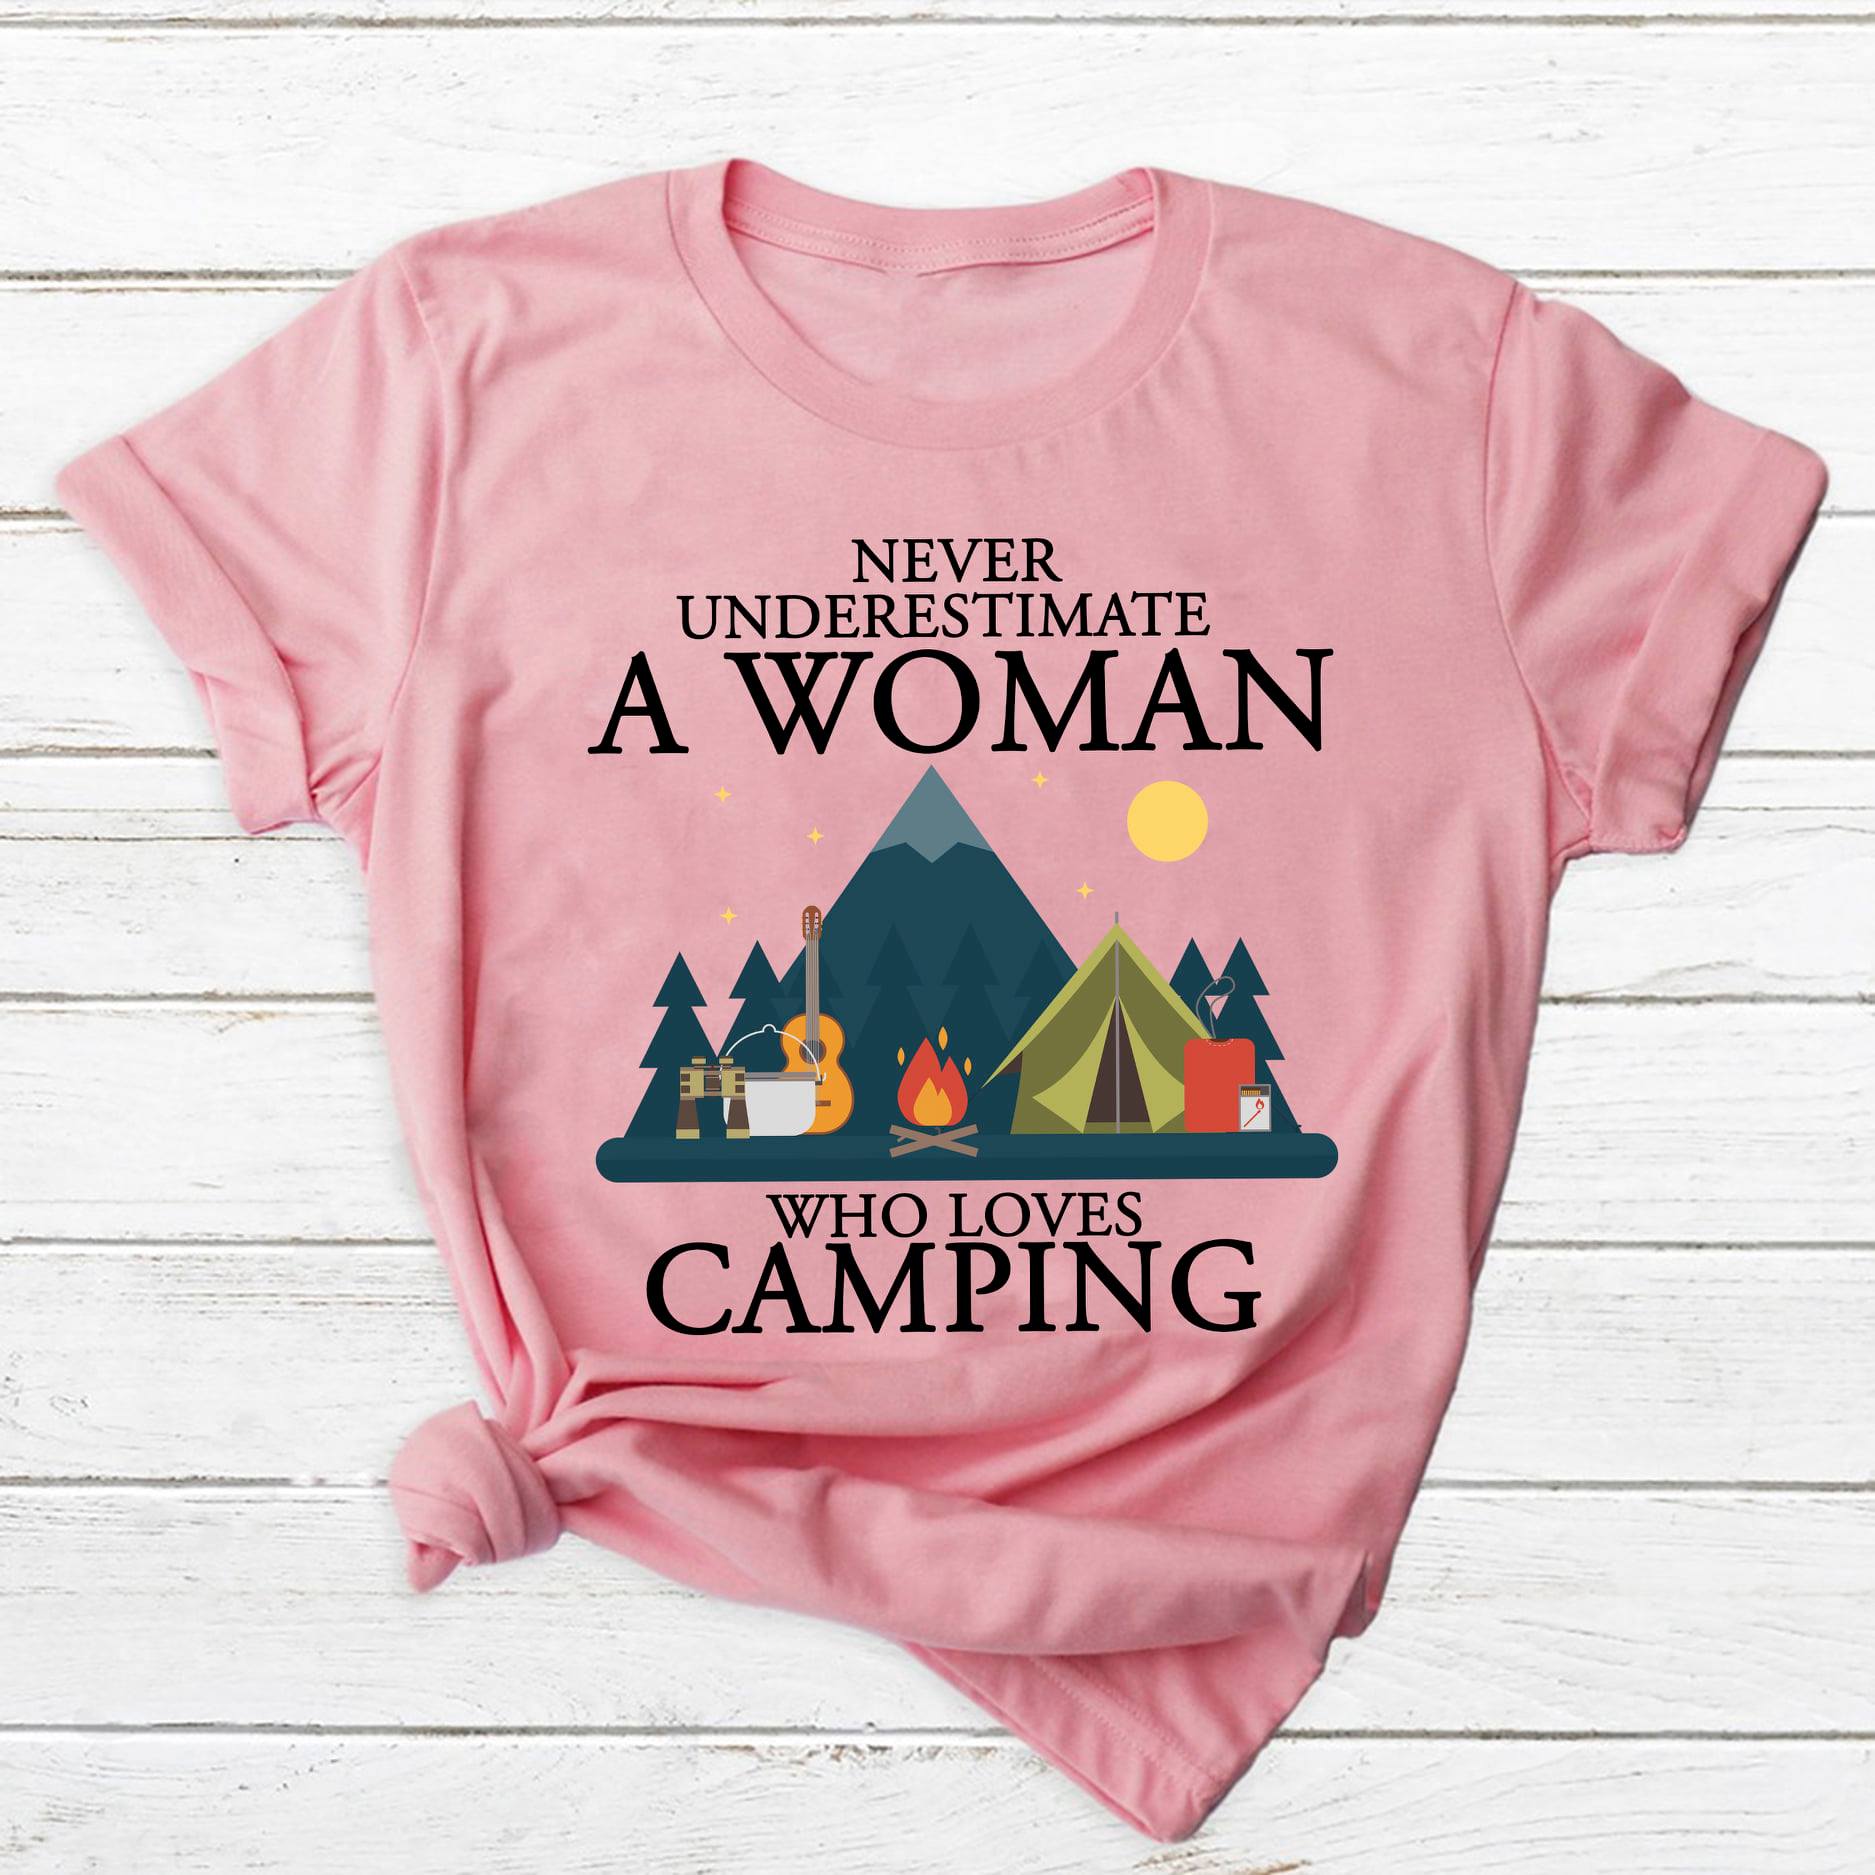 Never underestimate a woman who loves camping